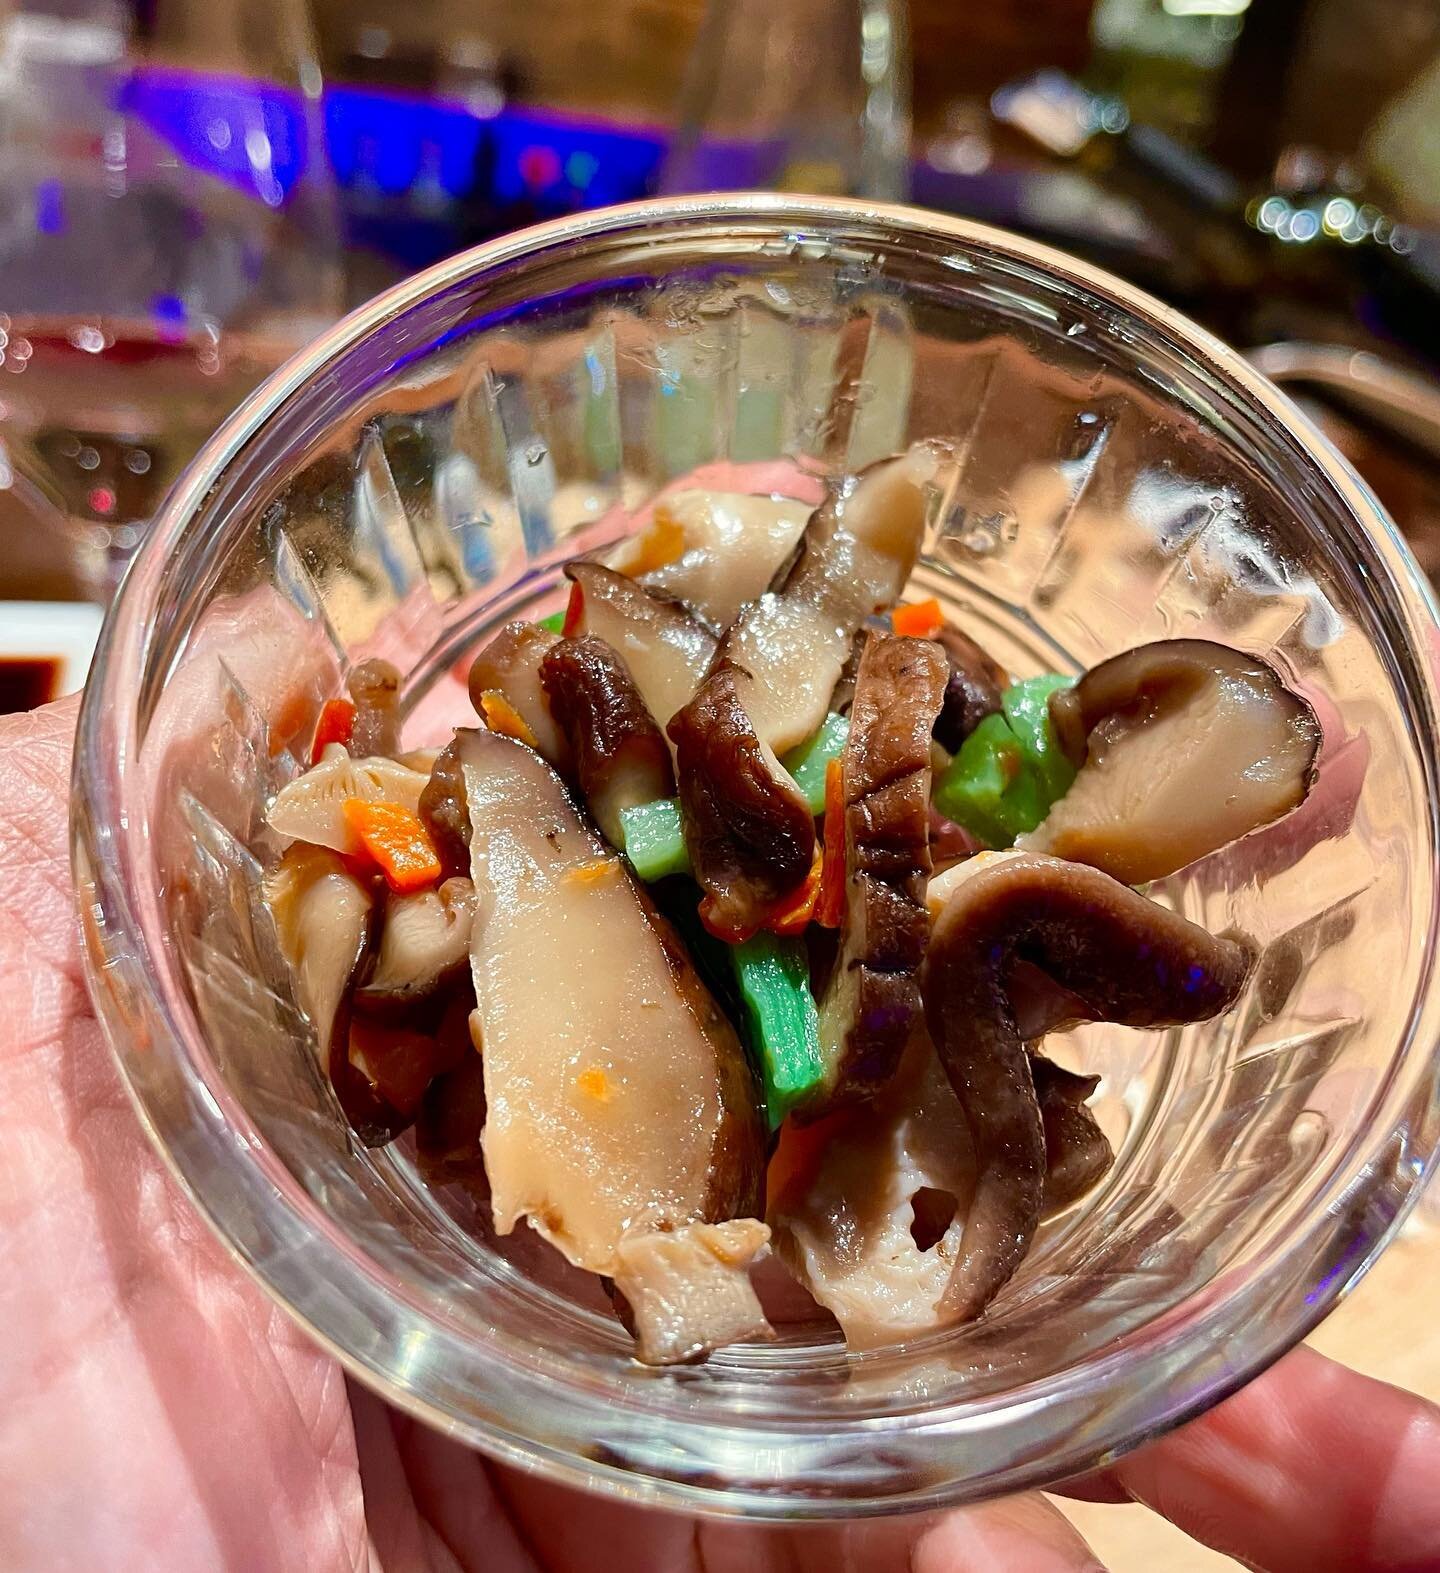 🍄 Super delish, vegan amuse bouche, with king oyster mushroom! If you have not tried this mushroom, you must! This unique variety of fungi is known for its meaty texture and unbelievably savory flavor. I like it must ceviche style. They are a good s